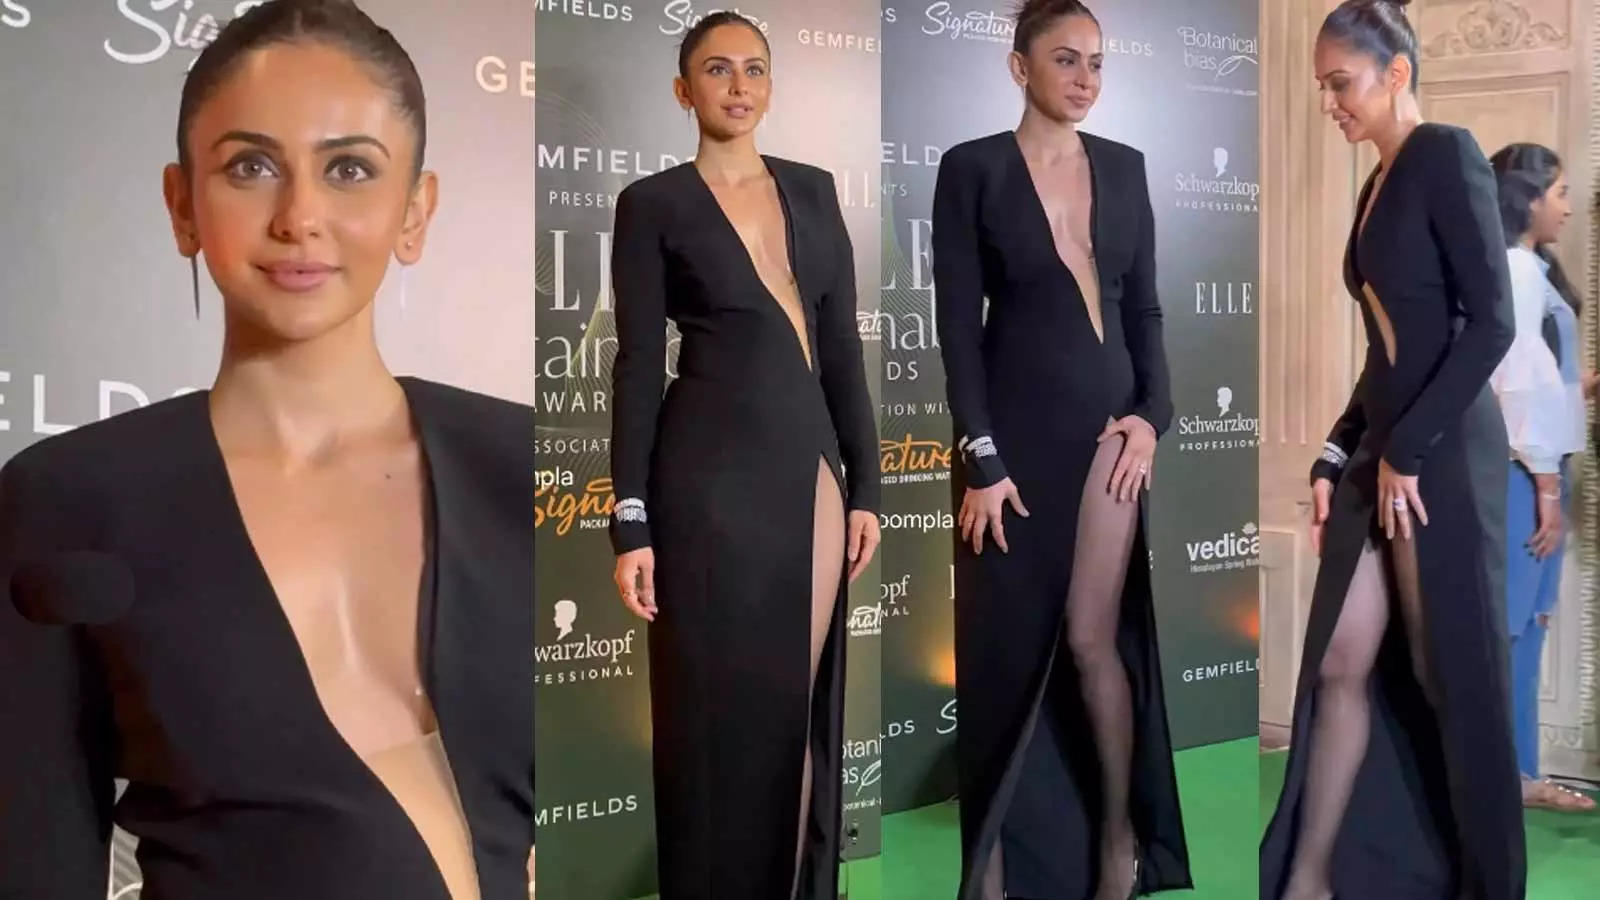 Rakul Preet Singh breaks the barrier, shows off her curves in low neckline  black gown | Hindi Movie News - Bollywood - Times of India